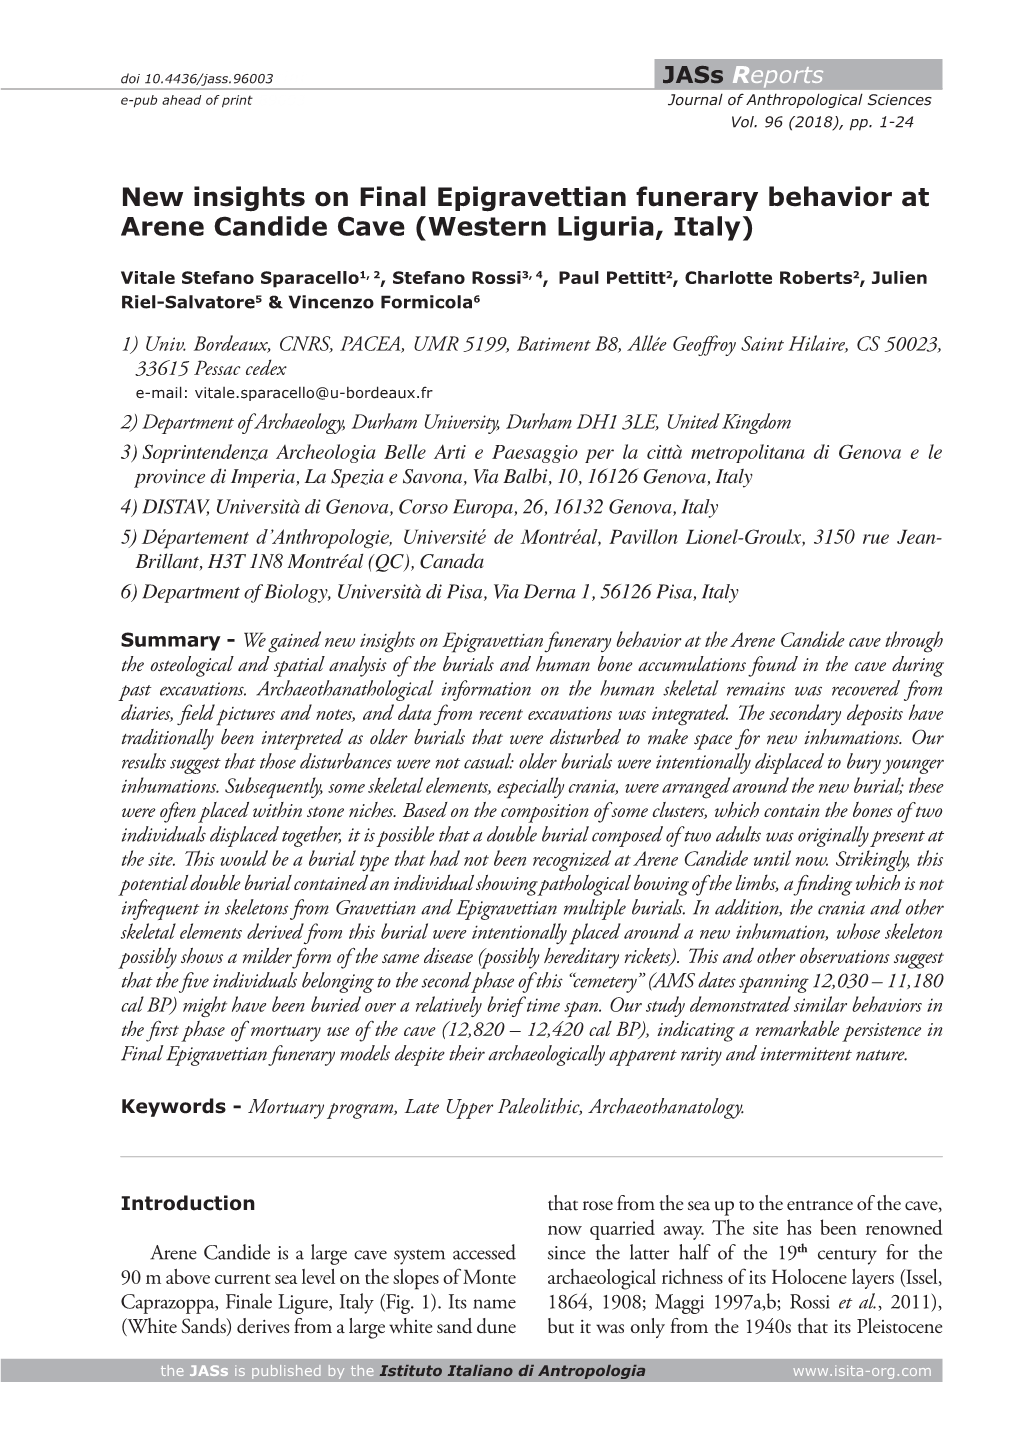 New Insights on Final Epigravettian Funerary Behavior at Arene Candide Cave (Western Liguria, Italy)